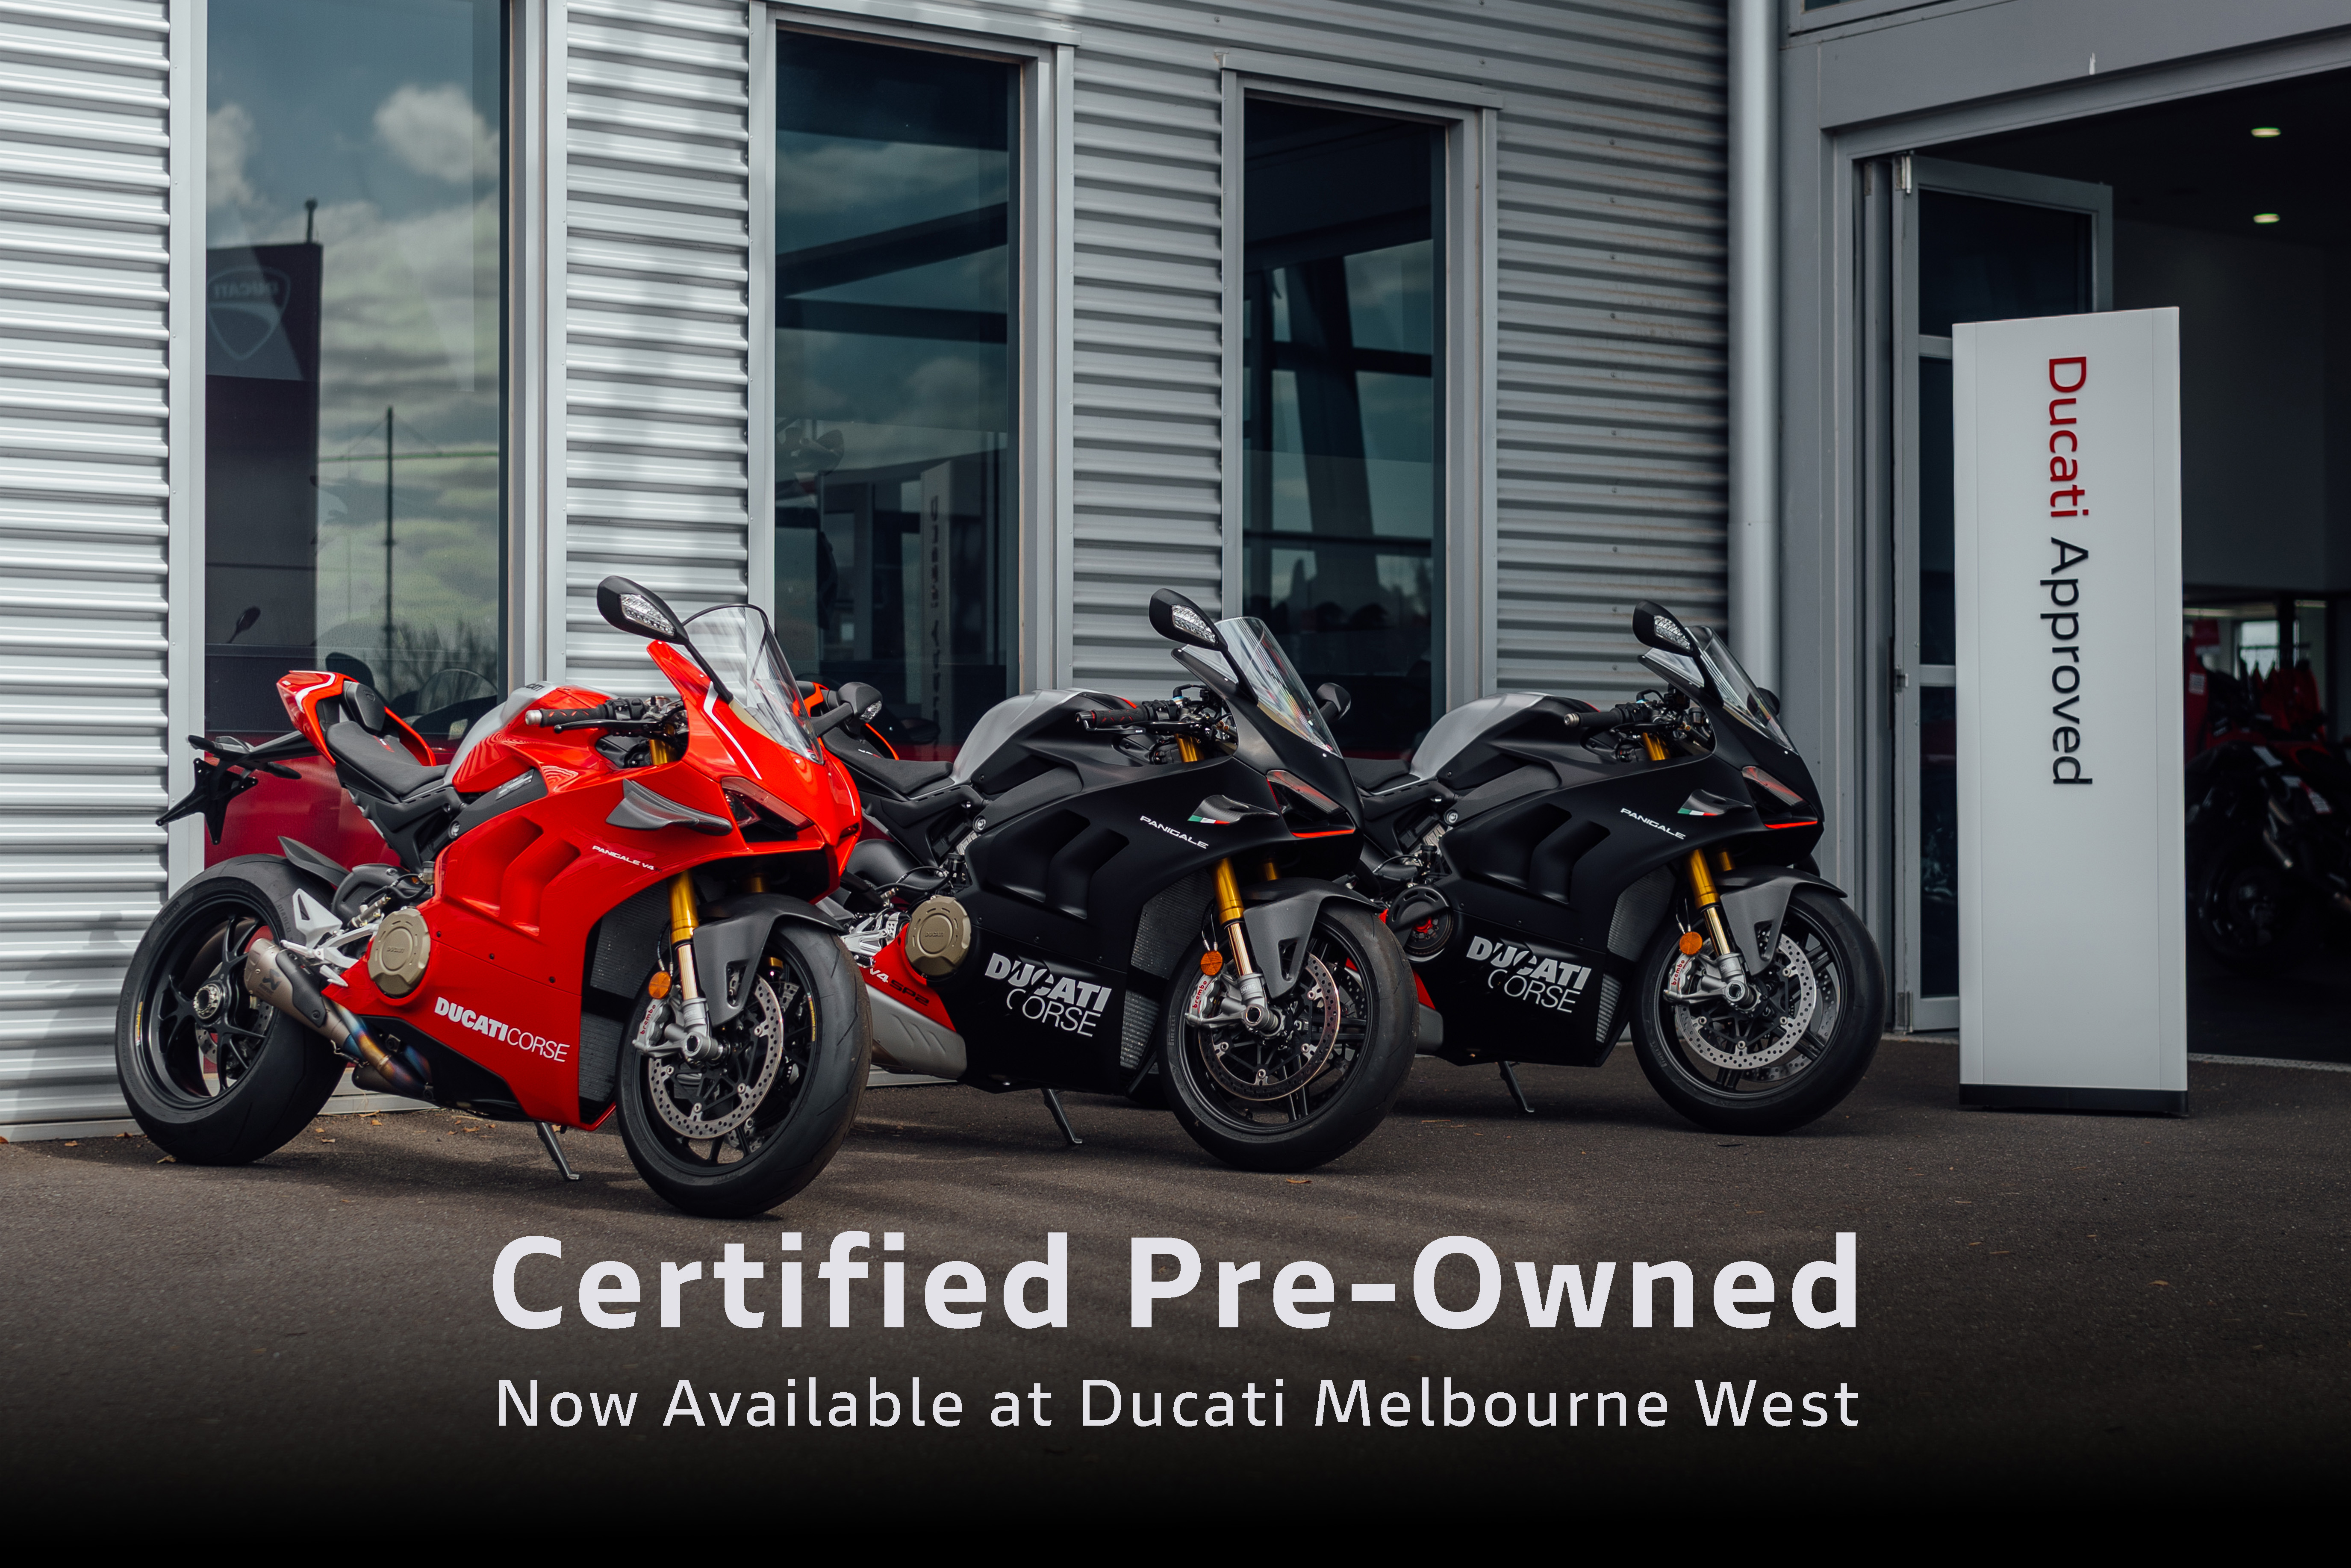 Certified Pre-owned Ducati Bikes now available at Ducati Melbourne West at Essendon Fields.